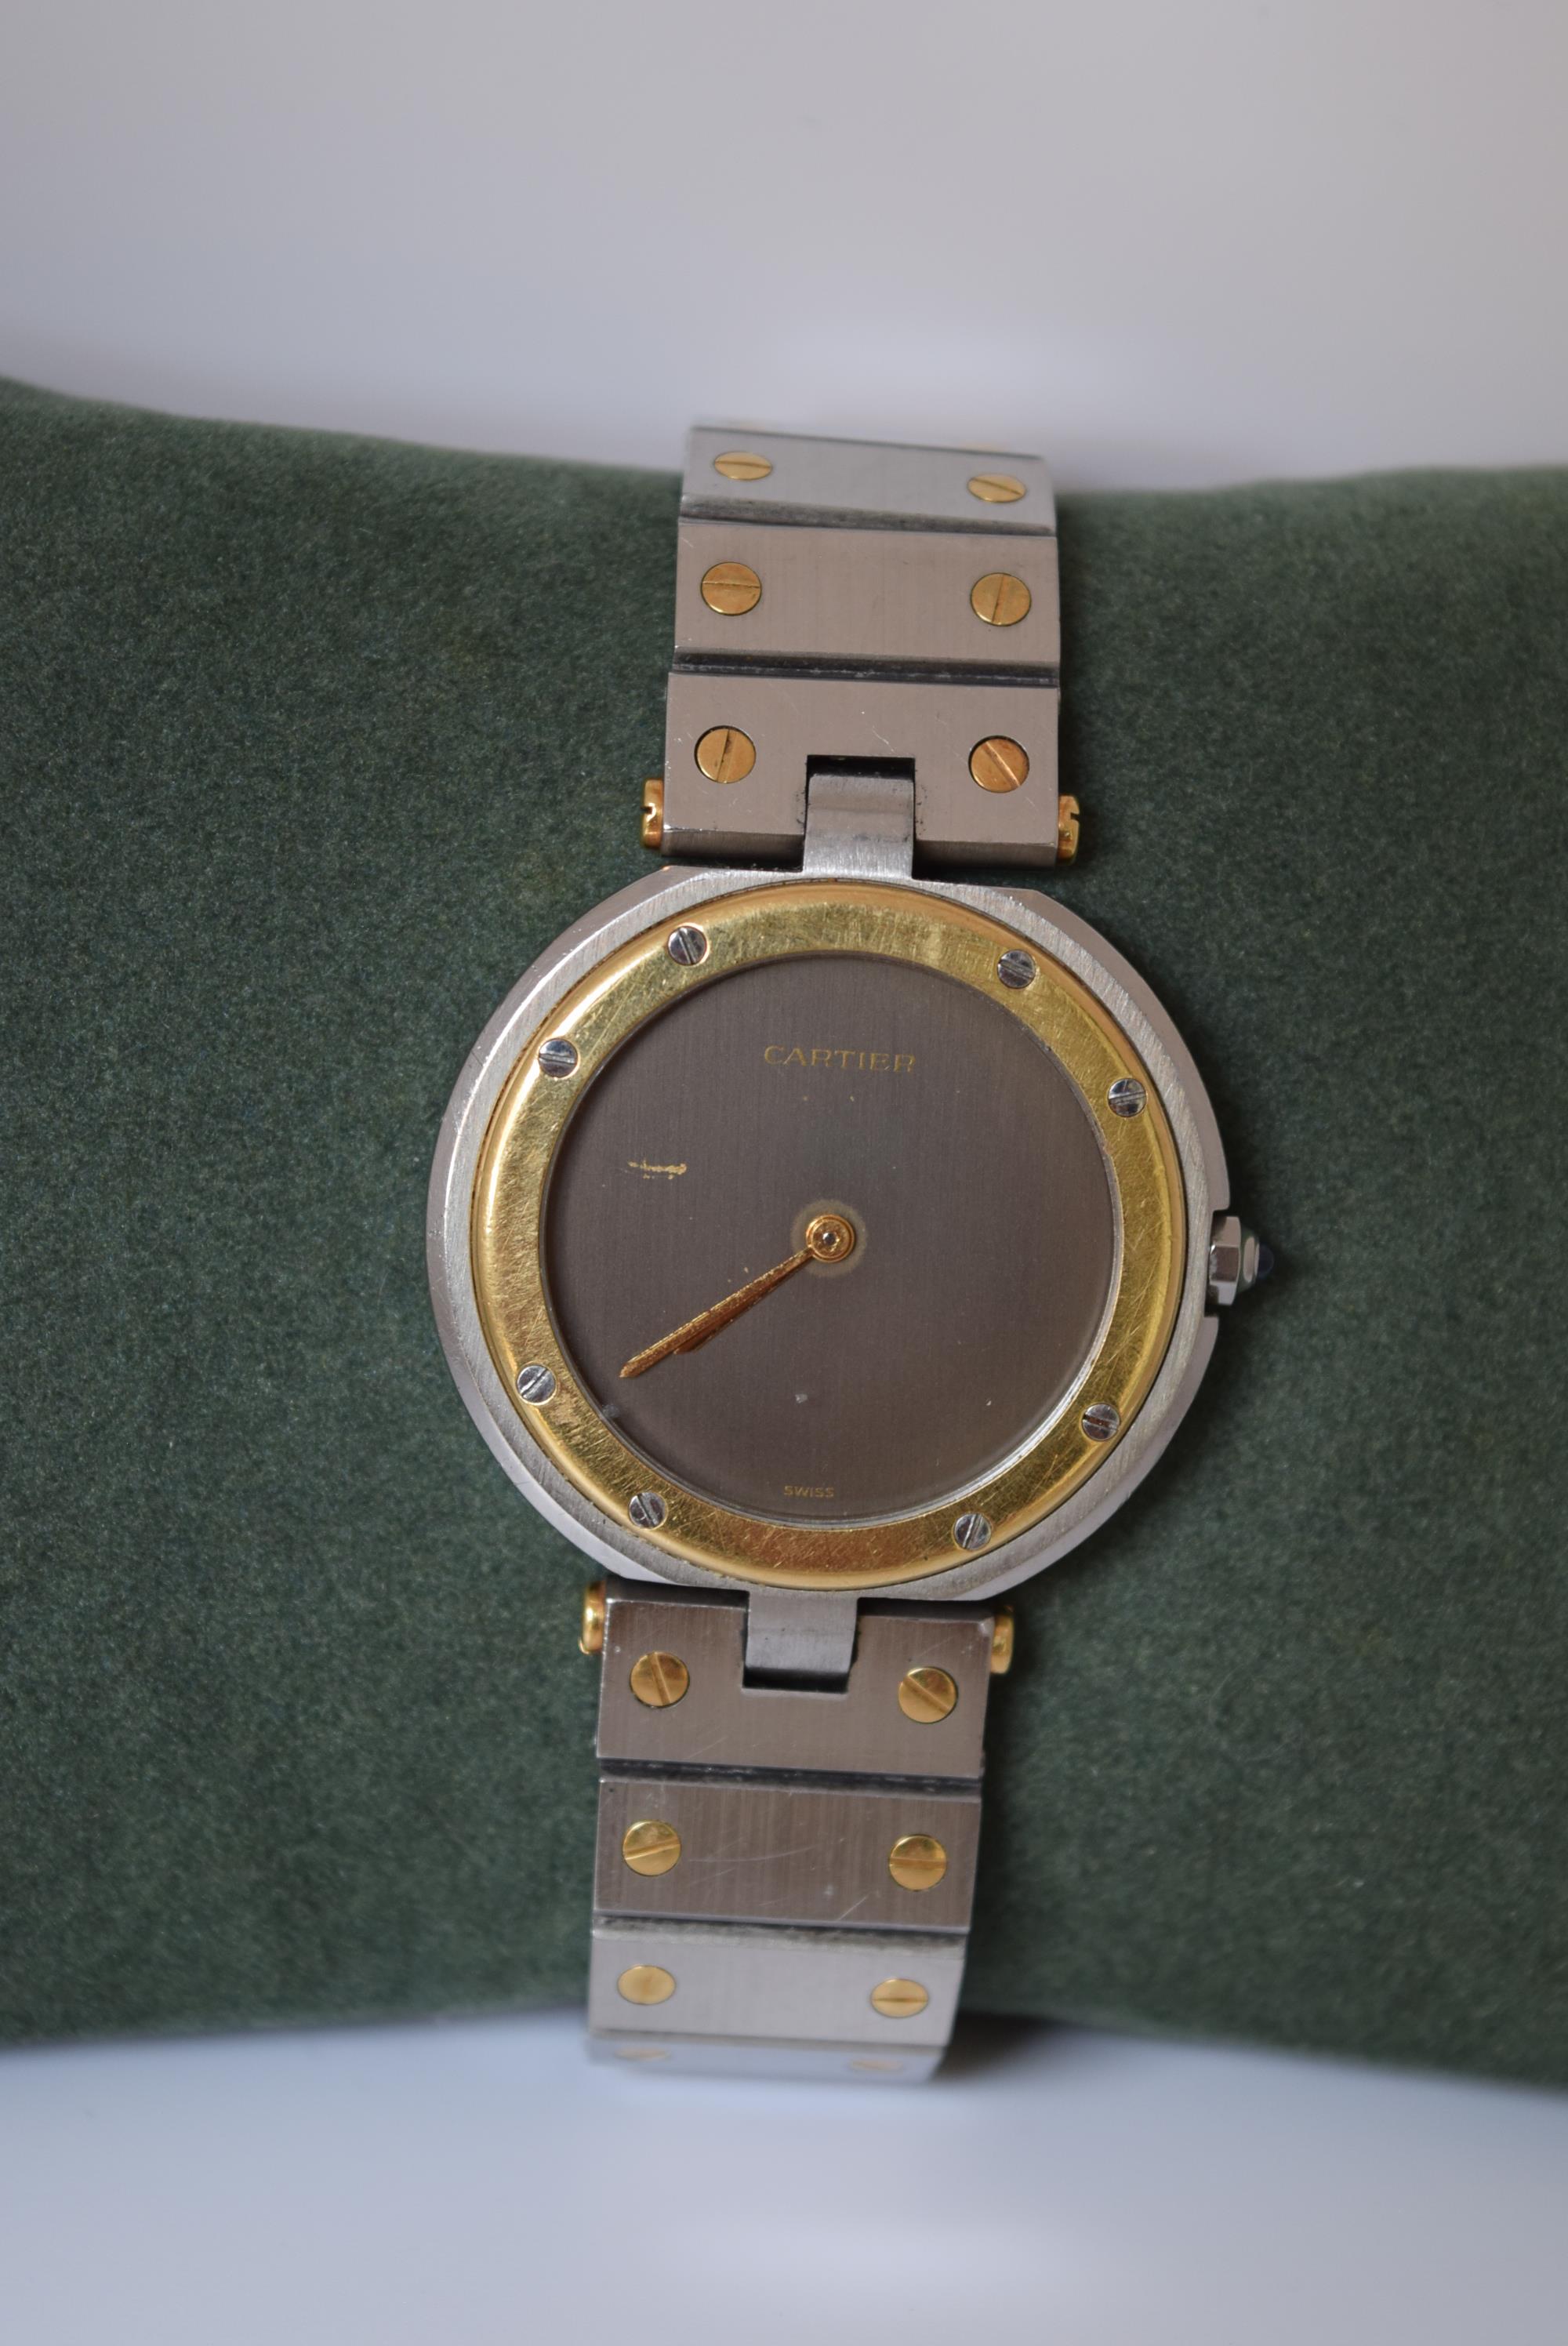 CARTIER WRIST WATCH IN STEEL AND GOLD - SIZE 32.5MM